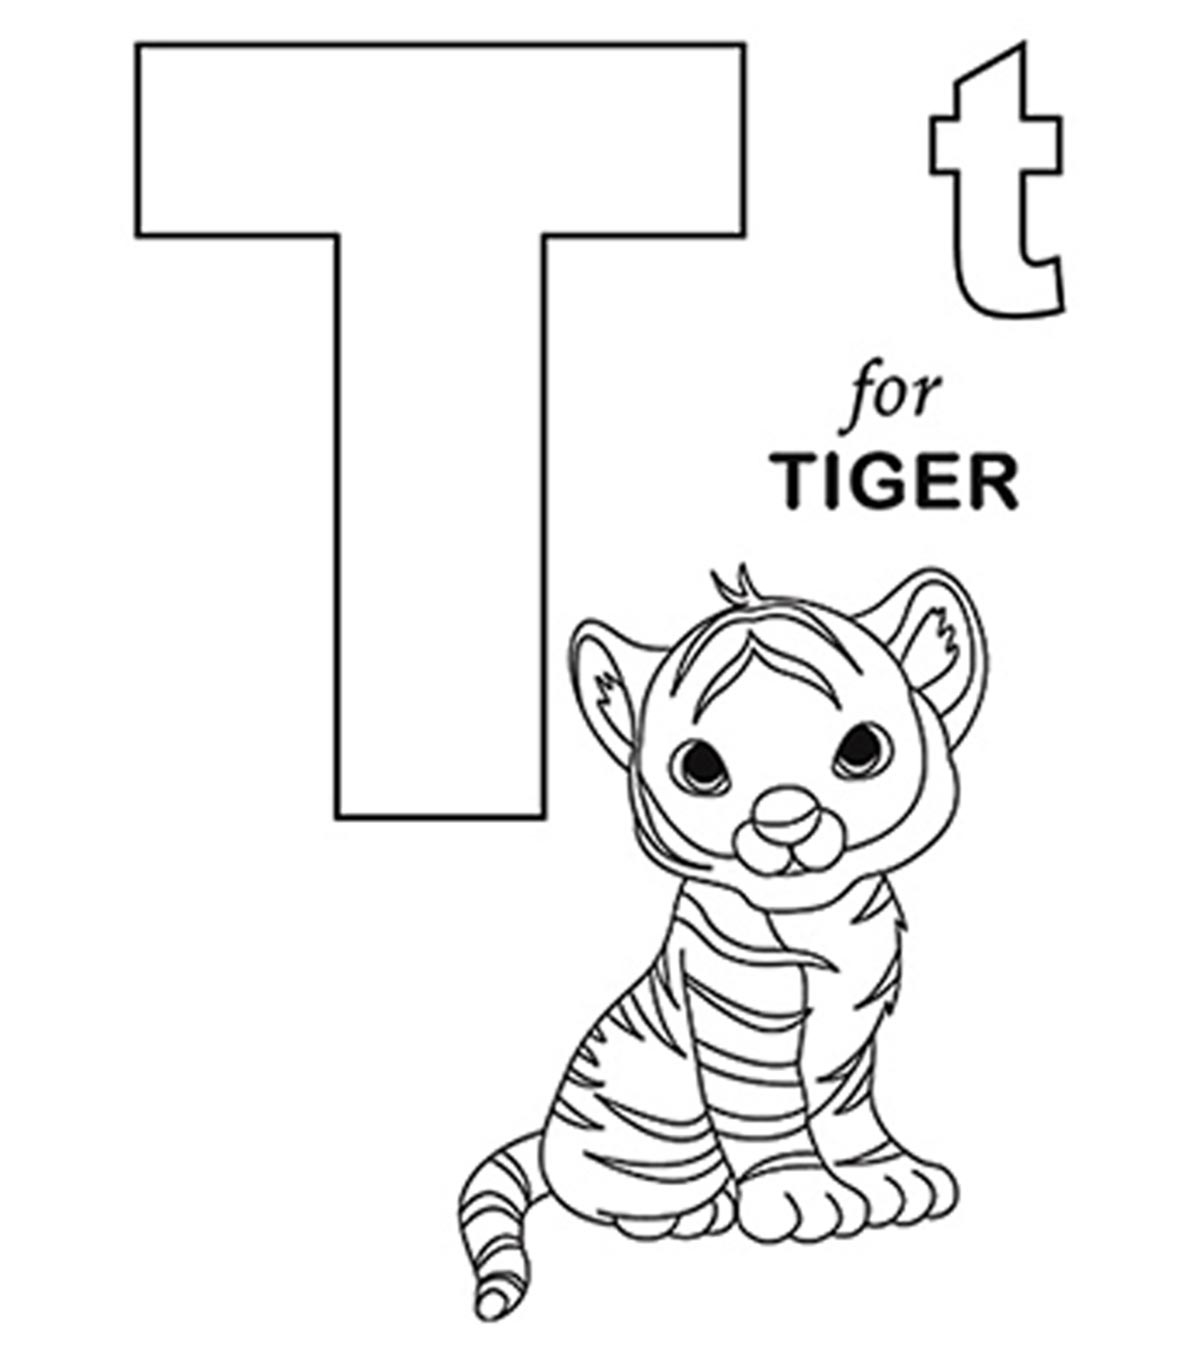 Top 10 Letter ‘T’ Coloring Pages Your Toddler Will Love To Learn & Color_image